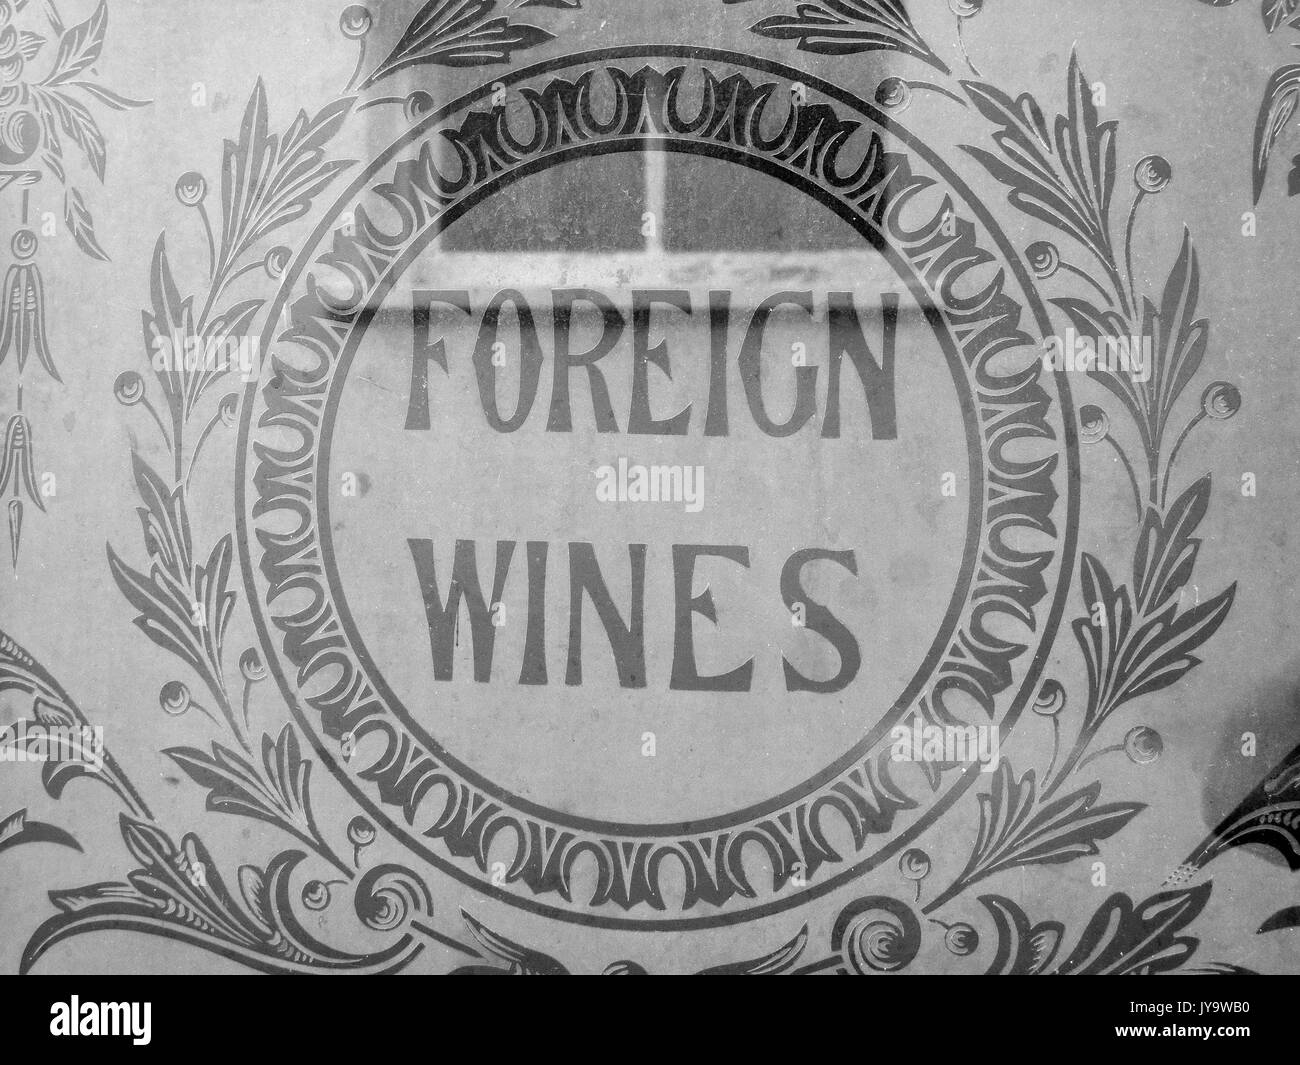 Old foreign wines advertisement sign etched into public house window Stock Photo